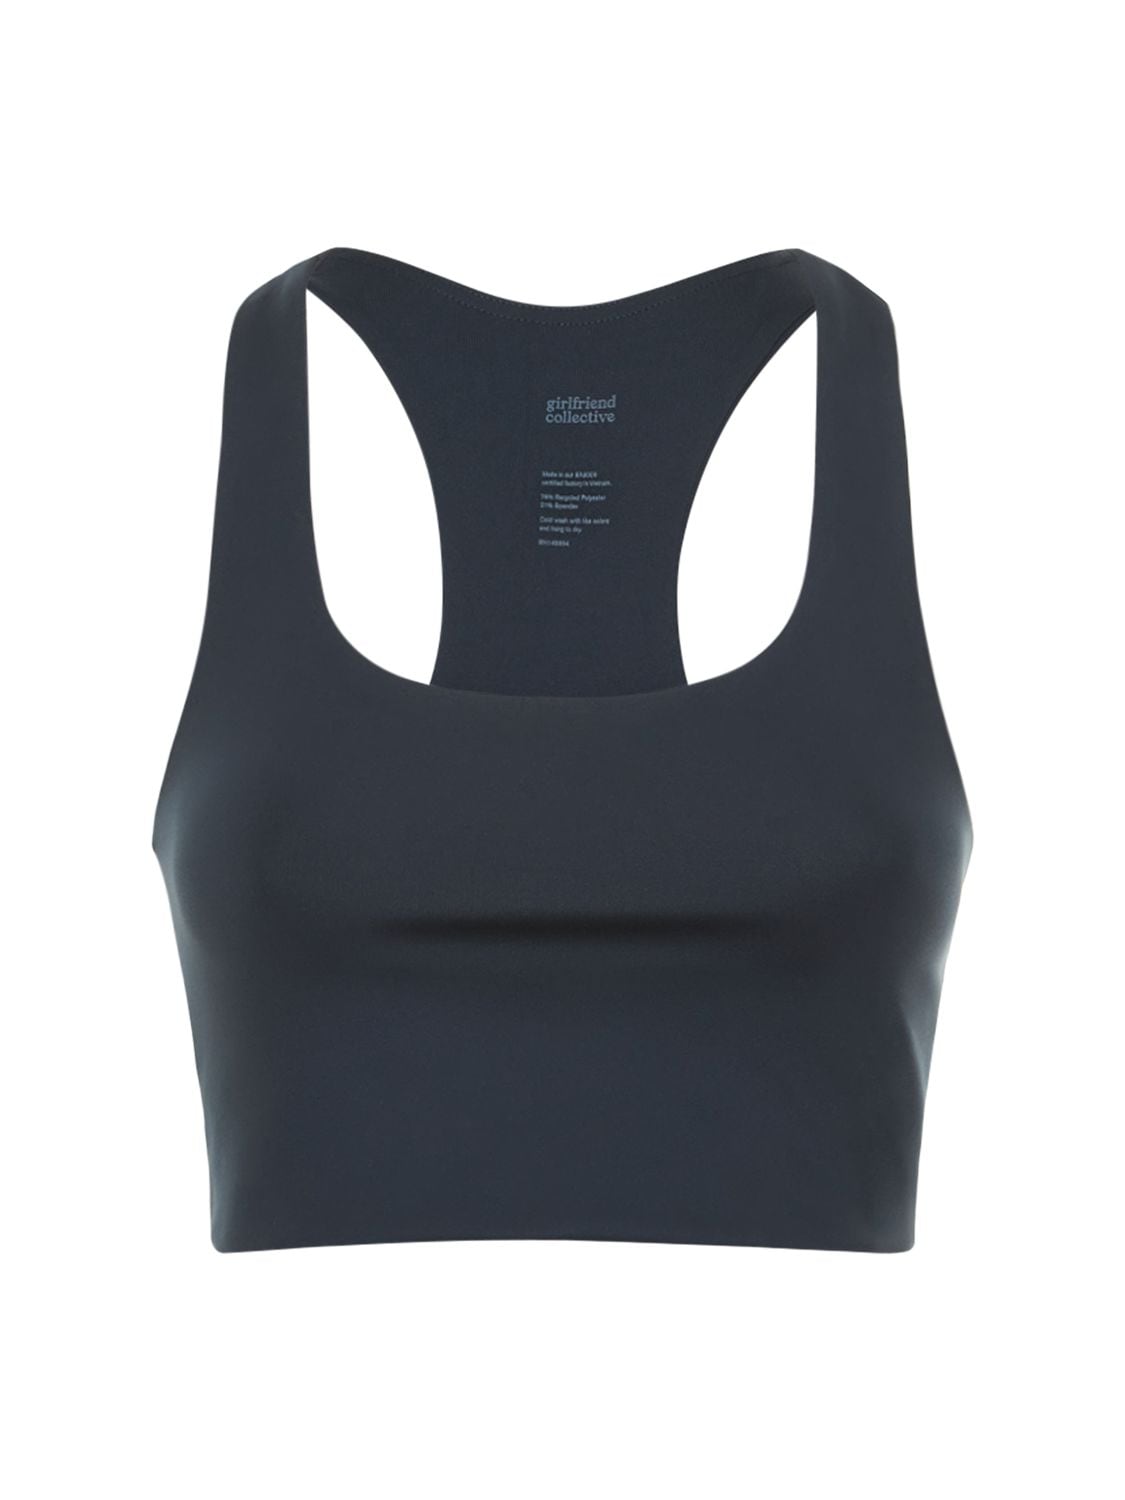 Girlfriend Collective Paloma Stretch Tech Bra Top In Navy